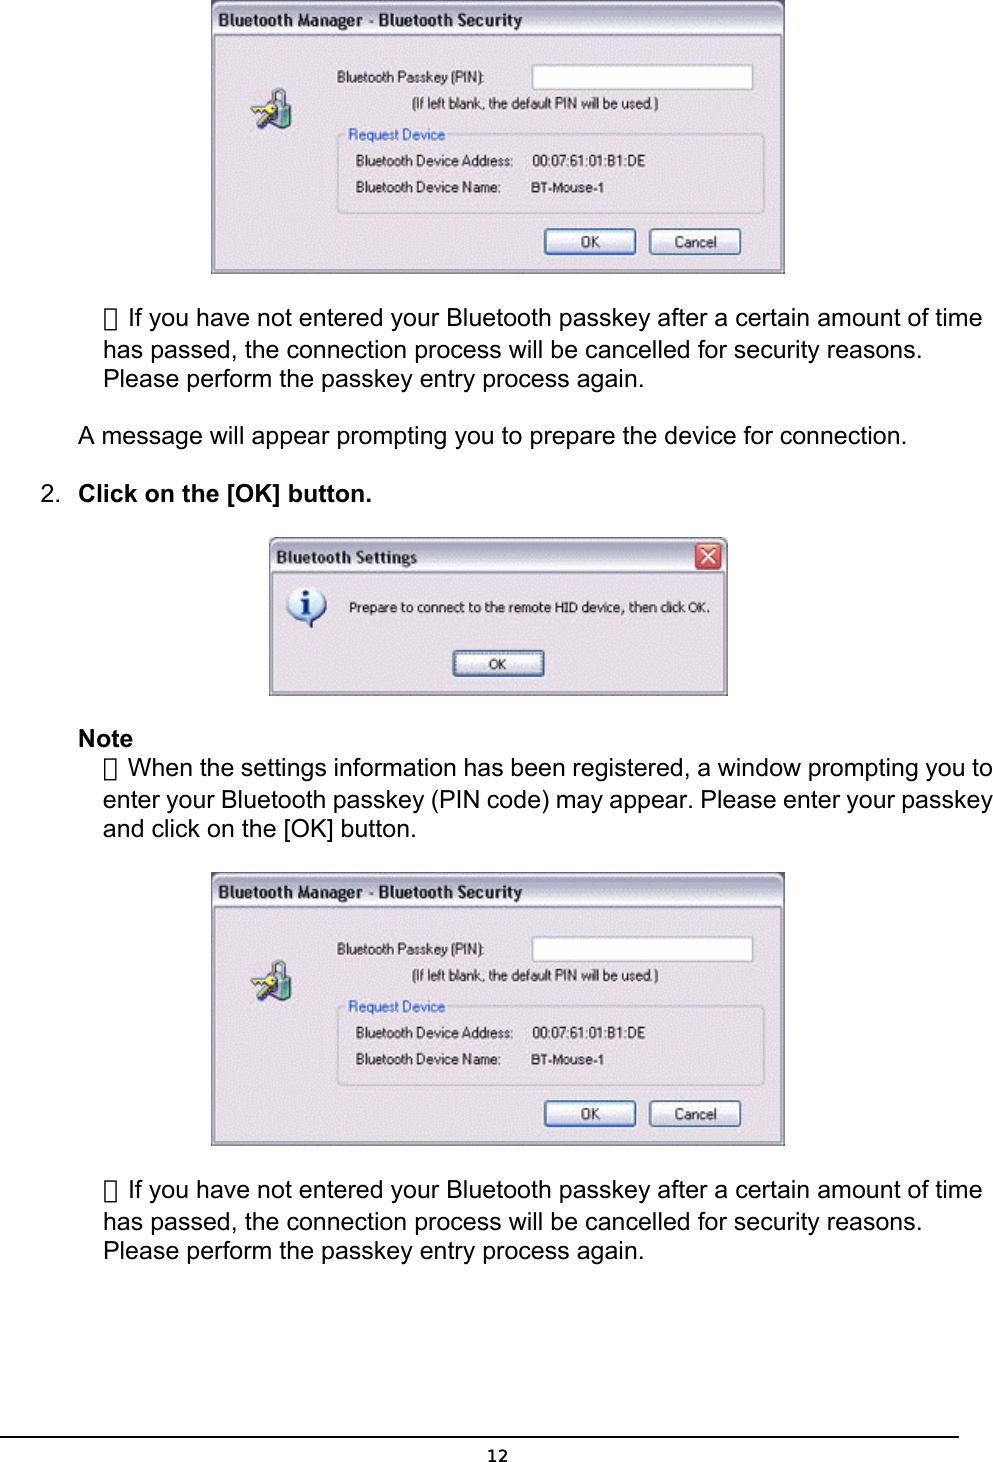   ．If you have not entered your Bluetooth passkey after a certain amount of time has passed, the connection process will be cancelled for security reasons. Please perform the passkey entry process again.  A message will appear prompting you to prepare the device for connection. 2.  Click on the [OK] button.  Note ．When the settings information has been registered, a window prompting you to enter your Bluetooth passkey (PIN code) may appear. Please enter your passkey and click on the [OK] button.  ．If you have not entered your Bluetooth passkey after a certain amount of time has passed, the connection process will be cancelled for security reasons. Please perform the passkey entry process again.   12